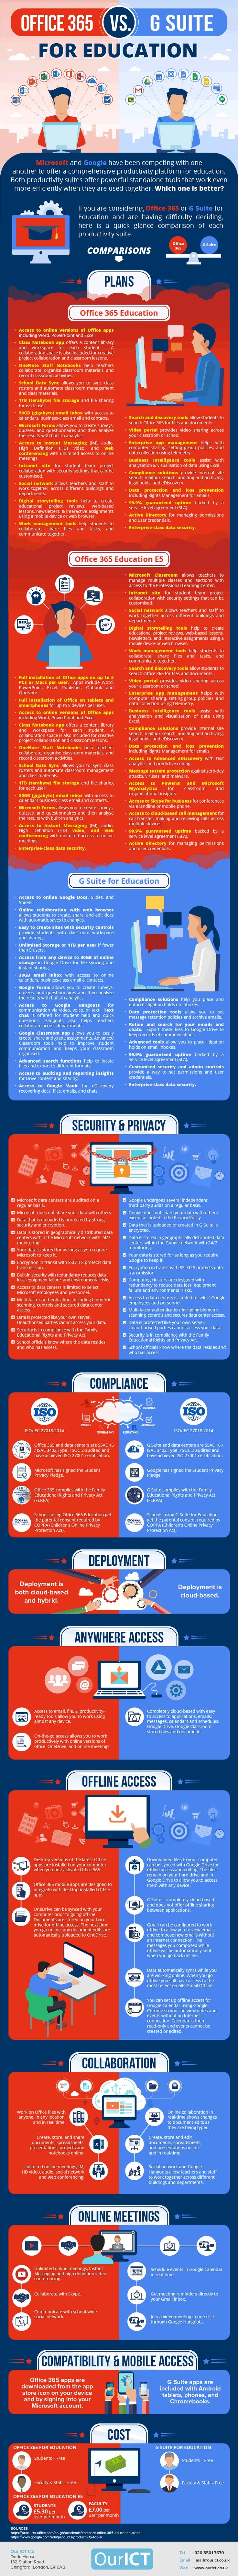 Office 365 Education vs. G Suite for Education - #infographic